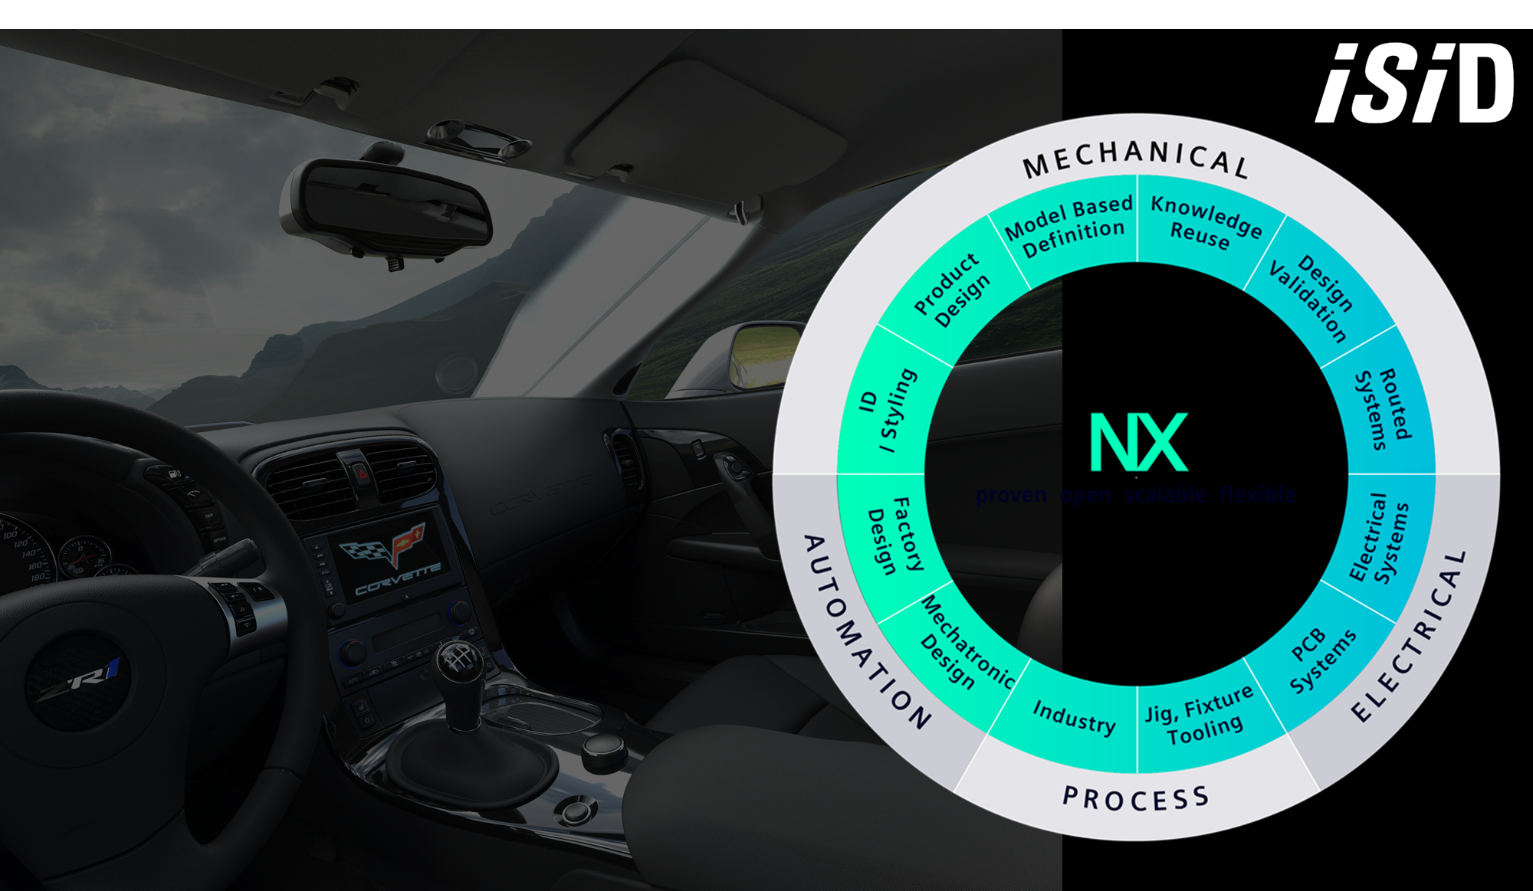 NX: Where engineering meets tomorrow Continuous innovation to deliver customer value.